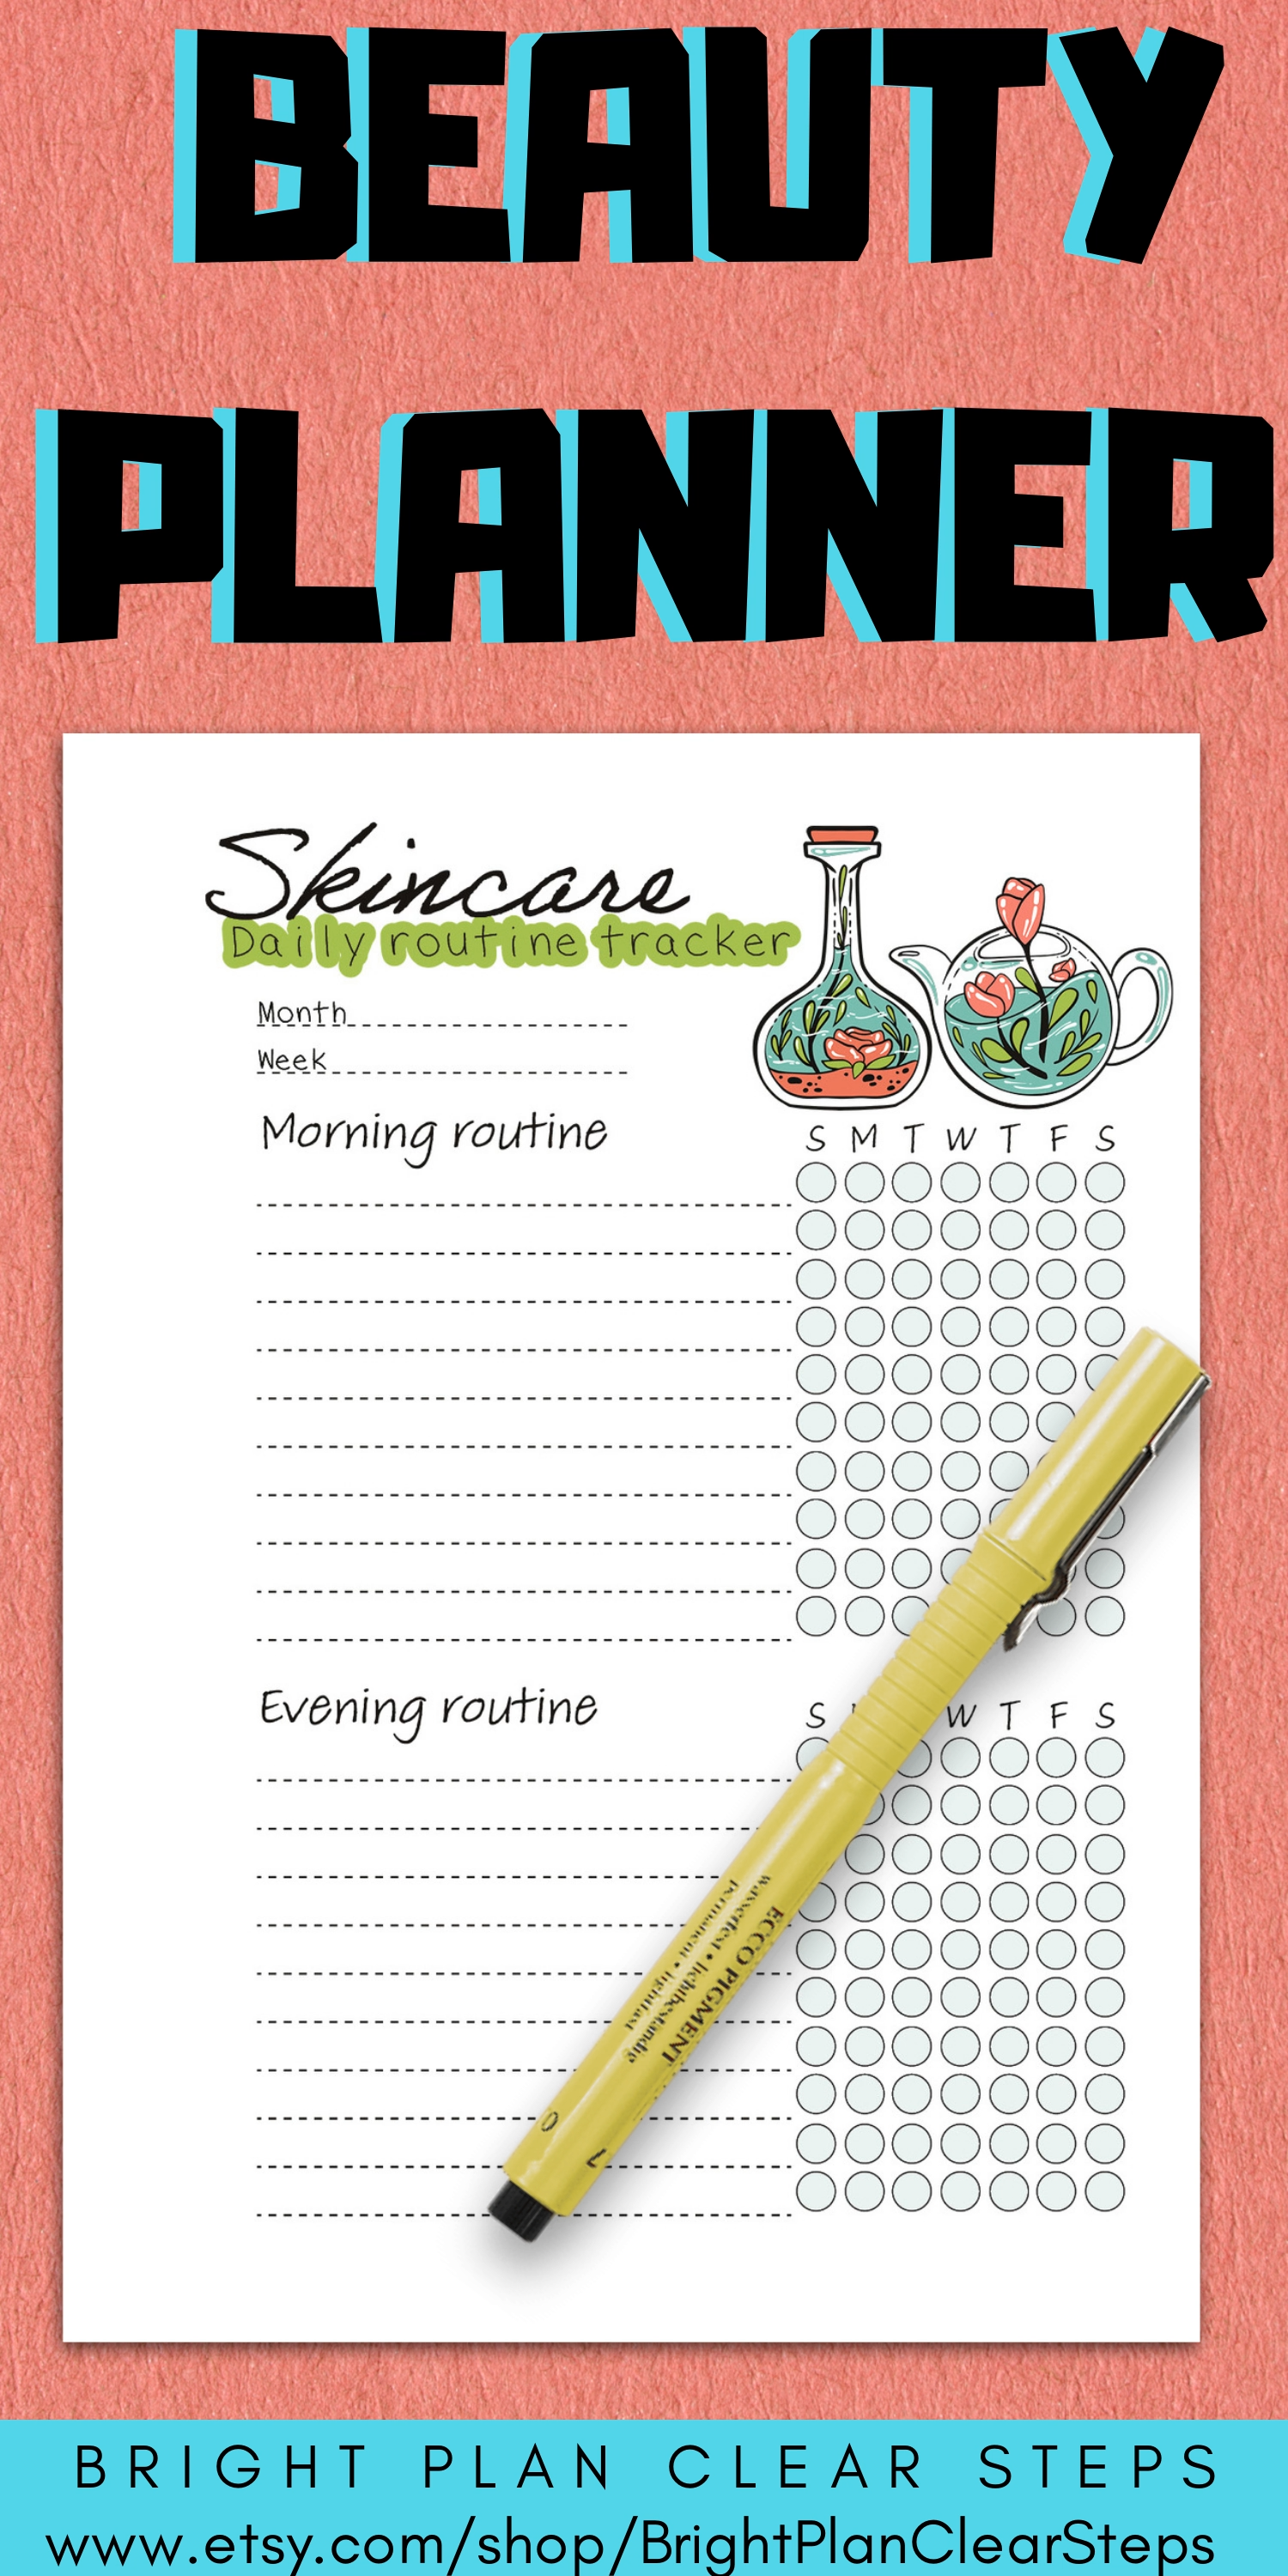 The Best Planner for your Beauty Routine. Skincare and Haircare Habit Tracker. Daily and Weekly - The Best Planner for your Beauty Routine. Skincare and Haircare Habit Tracker. Daily and Weekly -   18 beauty Routines checklist ideas